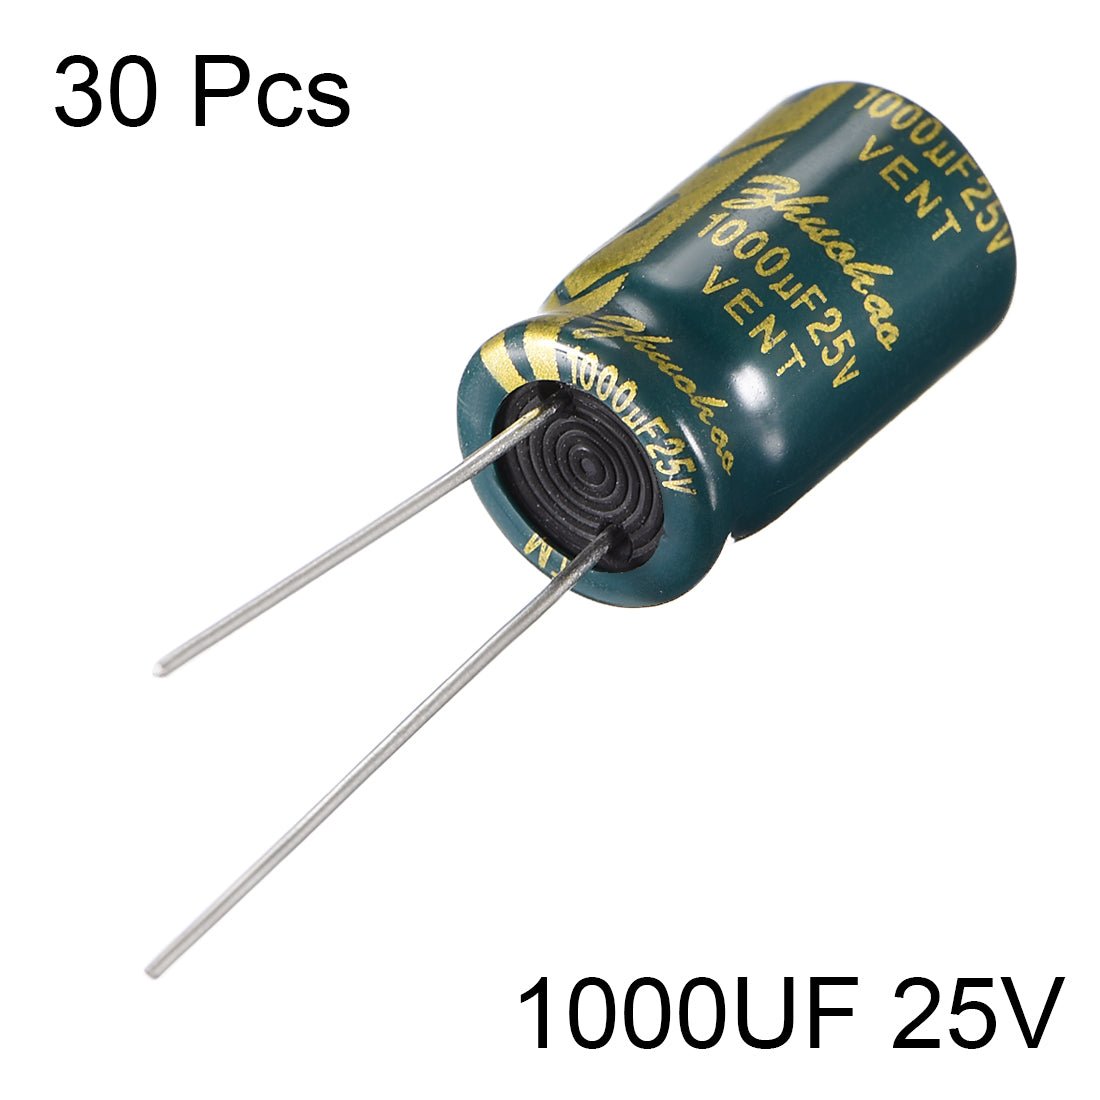 uxcell Uxcell Aluminum Radial Electrolytic Capacitor Low ESR Green with 1000UF 25V 105 Celsius Life 3000H 10 x 17 mm High Ripple Current,Low Impedance 30pcs